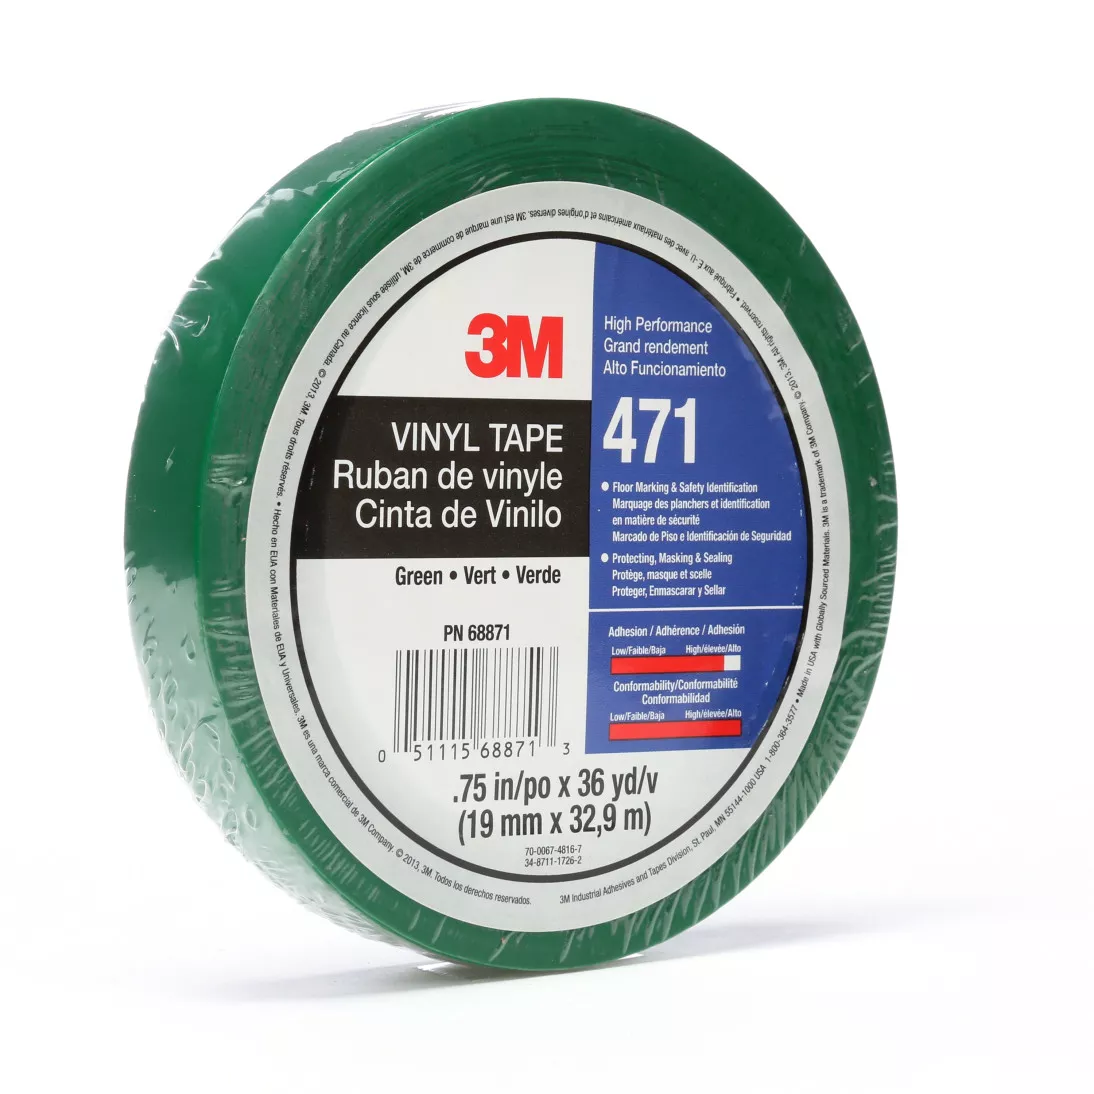 3M™ Vinyl Tape 471, Green, 1 in x 36 yd, 5.2 mil, 36 rolls per case,
Individually Wrapped Conveniently Packaged